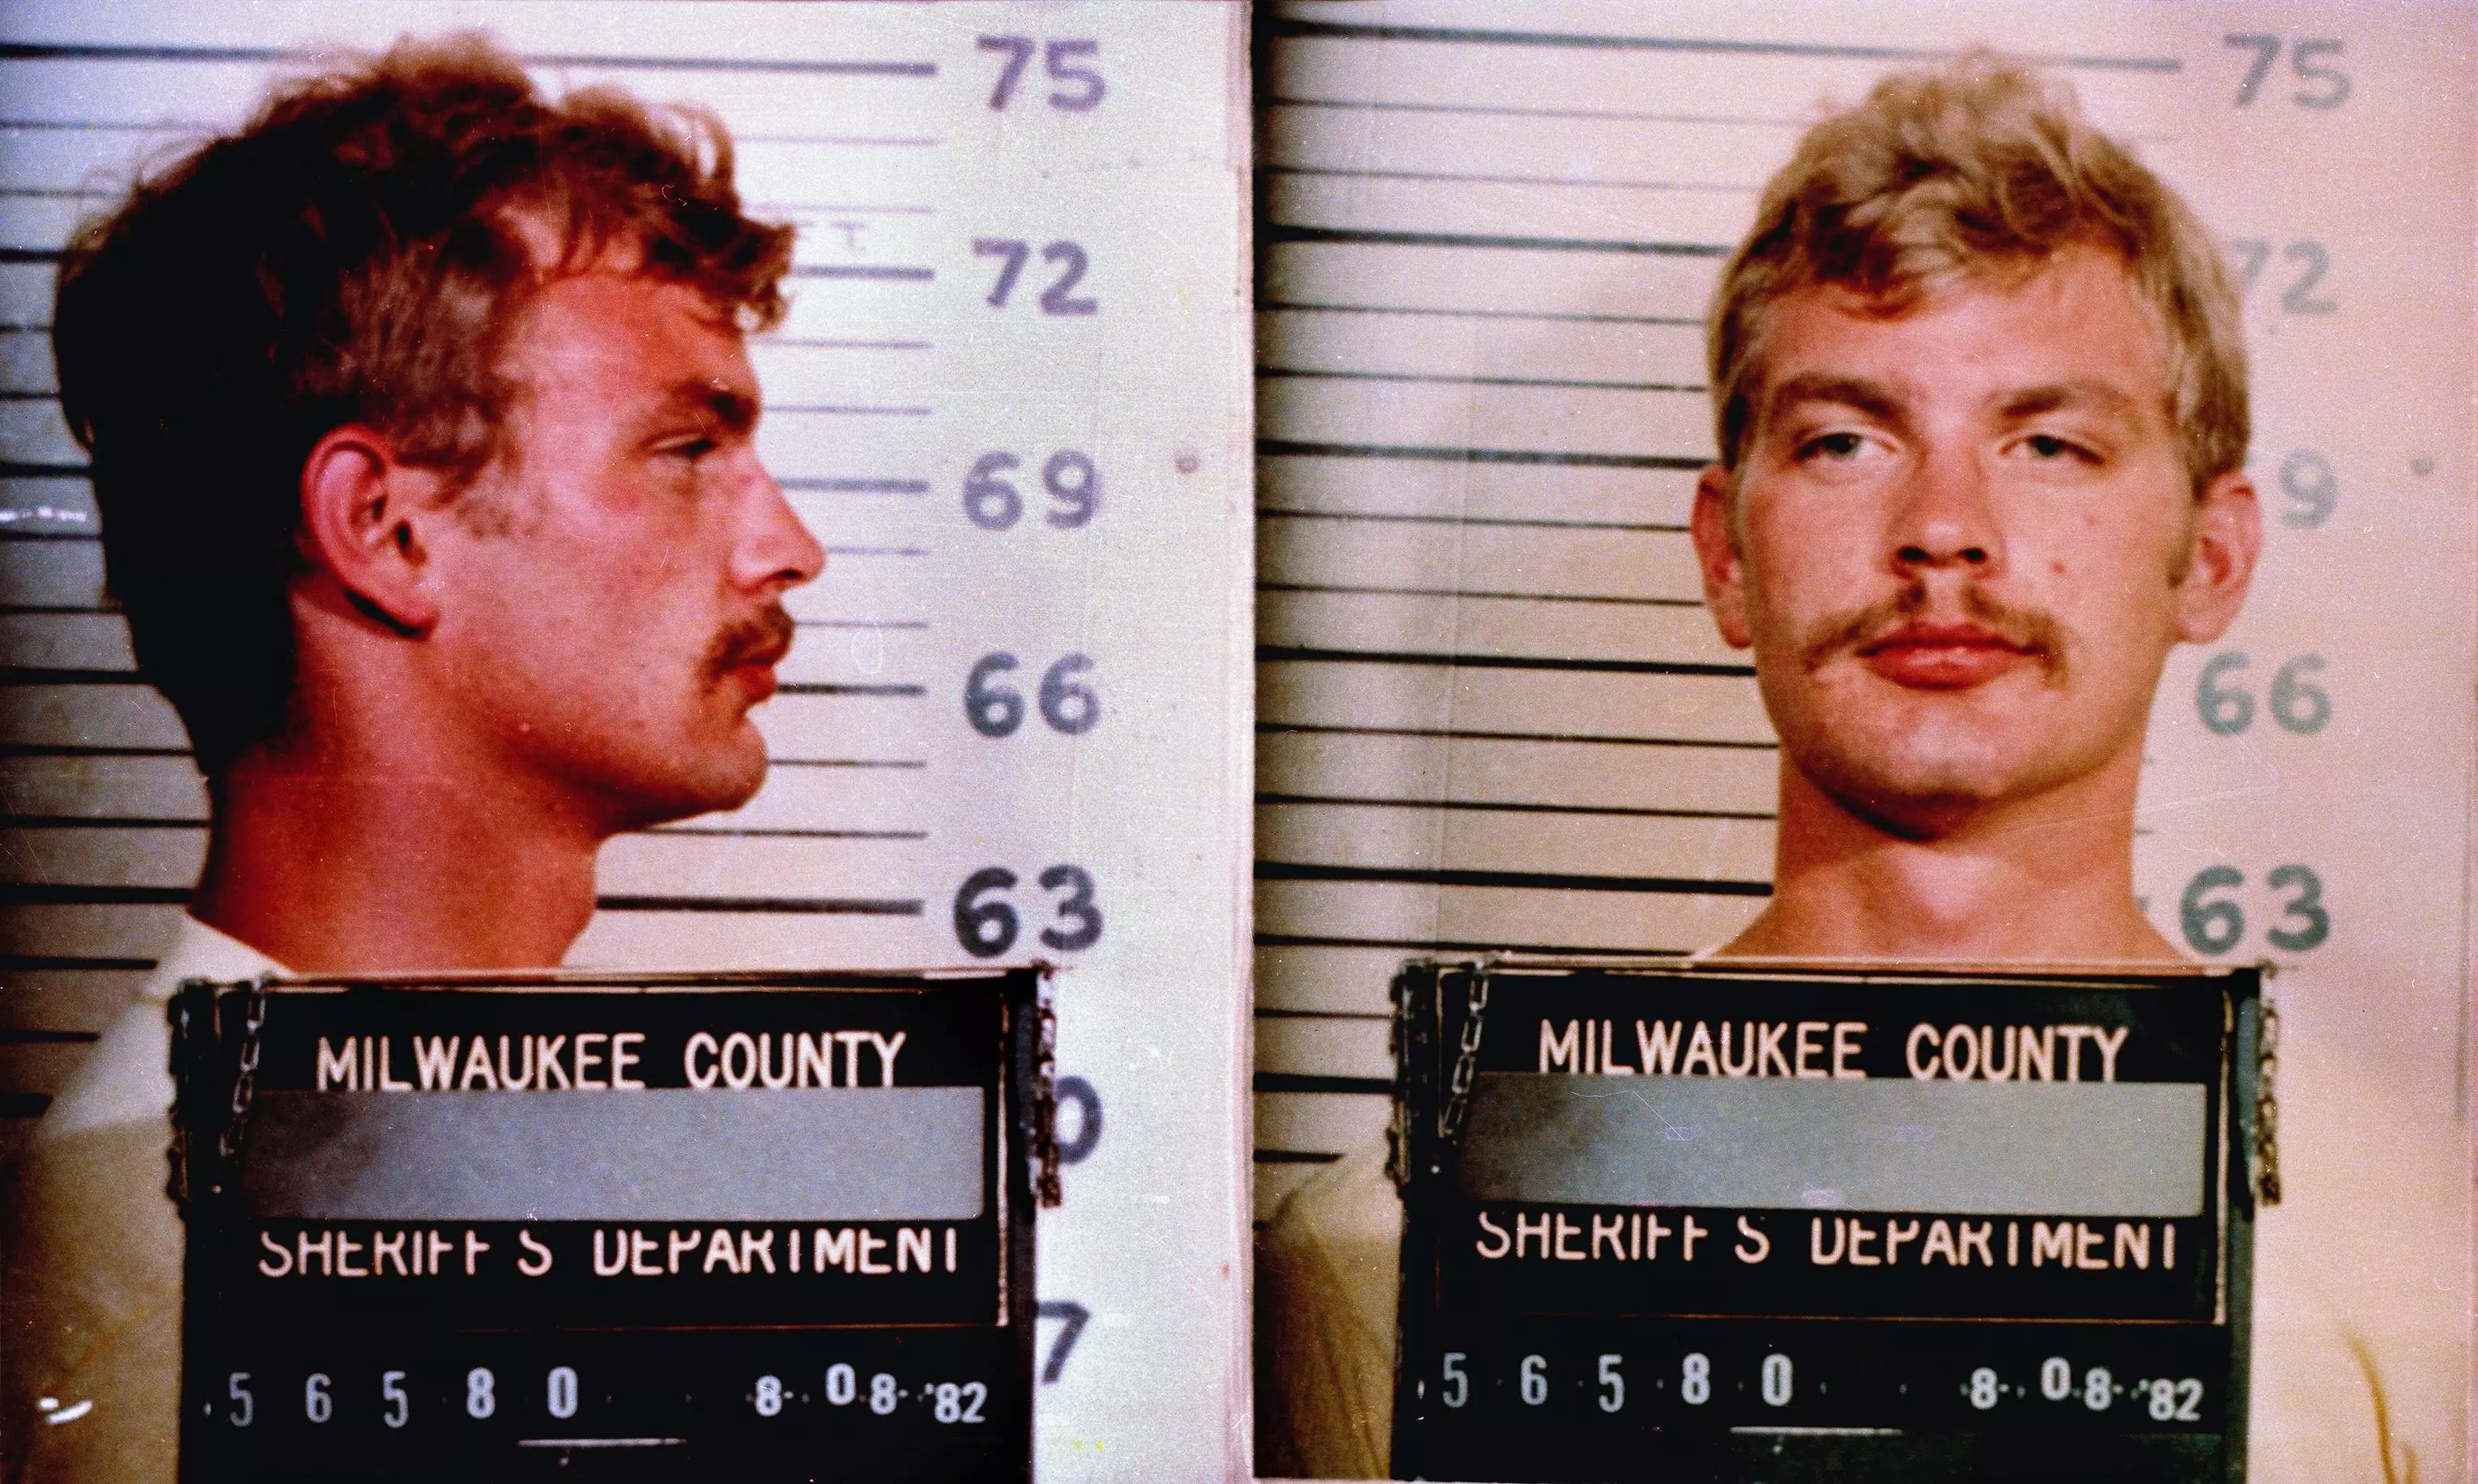 Jeffrey Dahmer murdered and dismembered his victims between 1978 and 1991 (